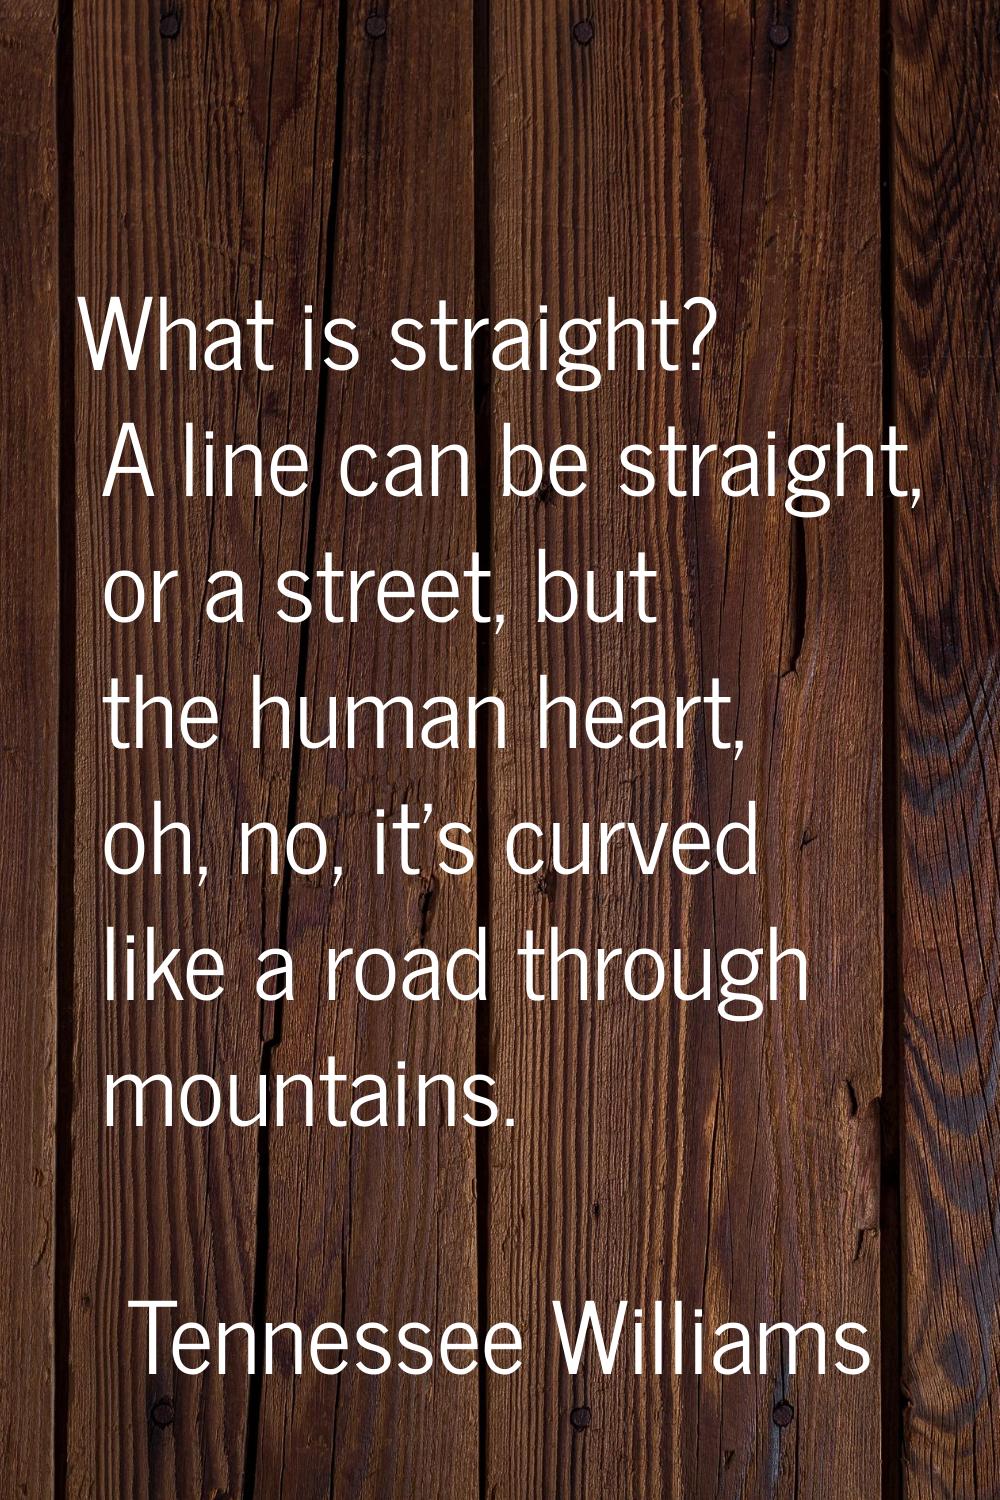 What is straight? A line can be straight, or a street, but the human heart, oh, no, it's curved lik